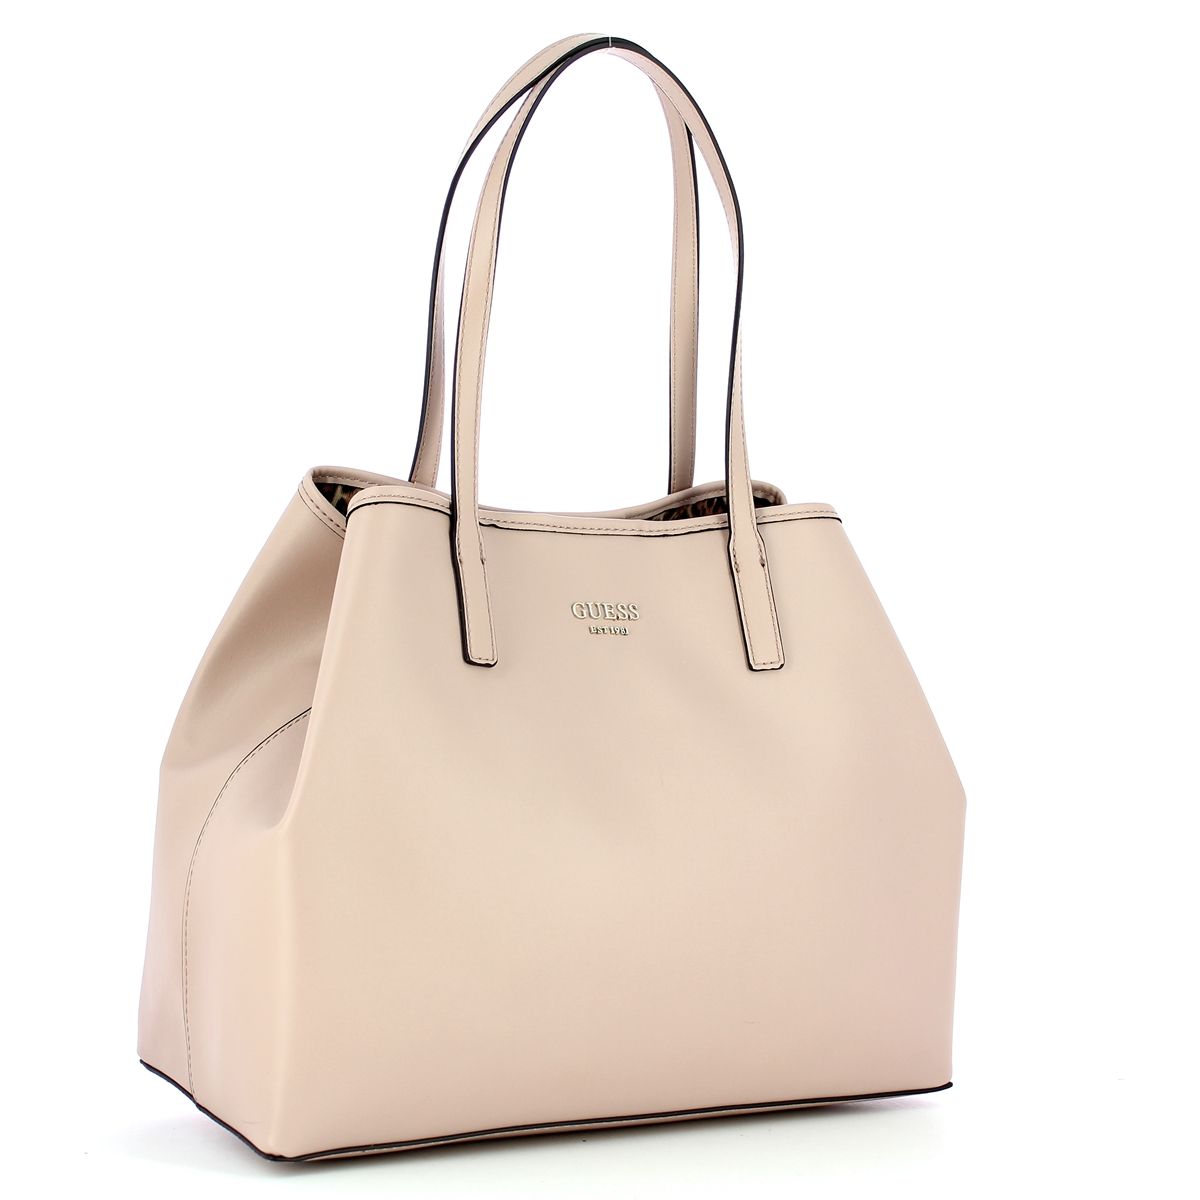 Large Tote Bag Vikky with pochette Guess, spacious everyday shoulderbag made in faux leather, with a soft silhouette. Keep all items safe in the zippered maxi pouch.